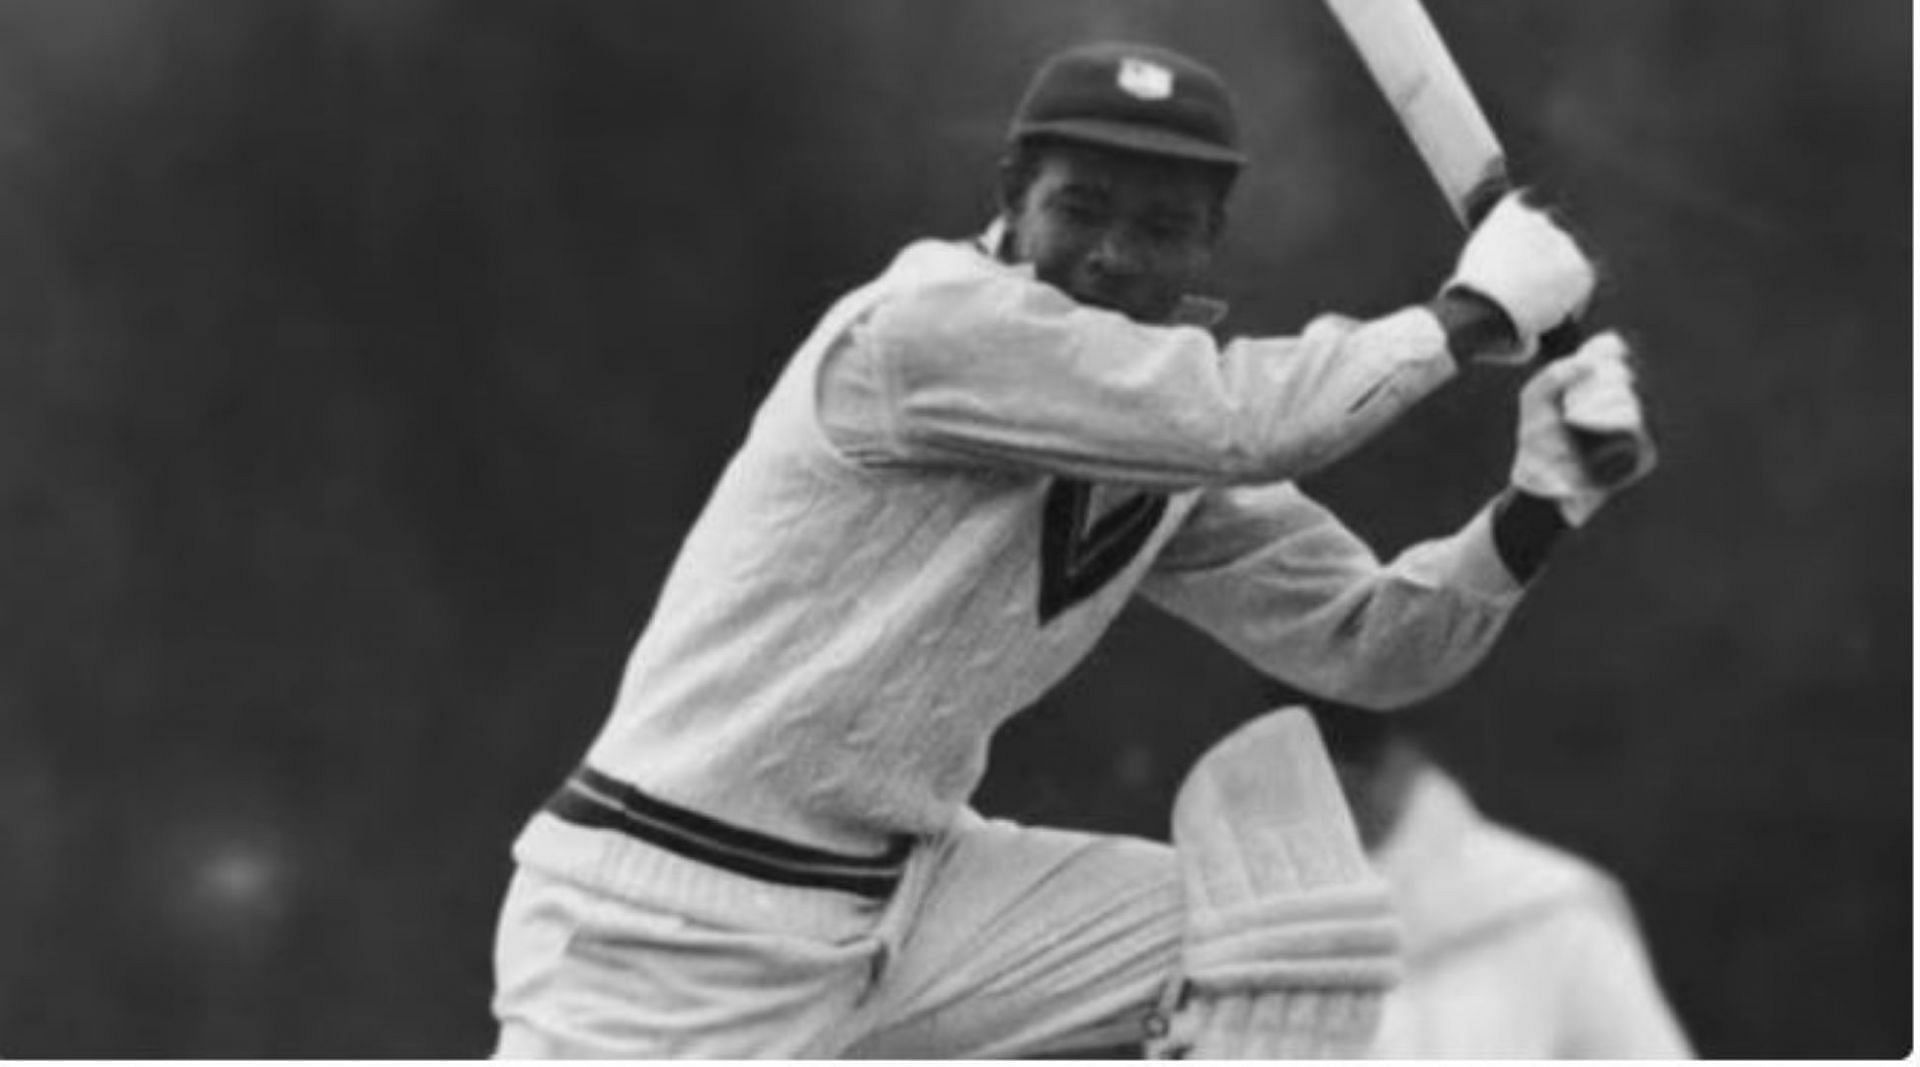 Everton Weekes stole the show in the 1948/49 Test series against India.